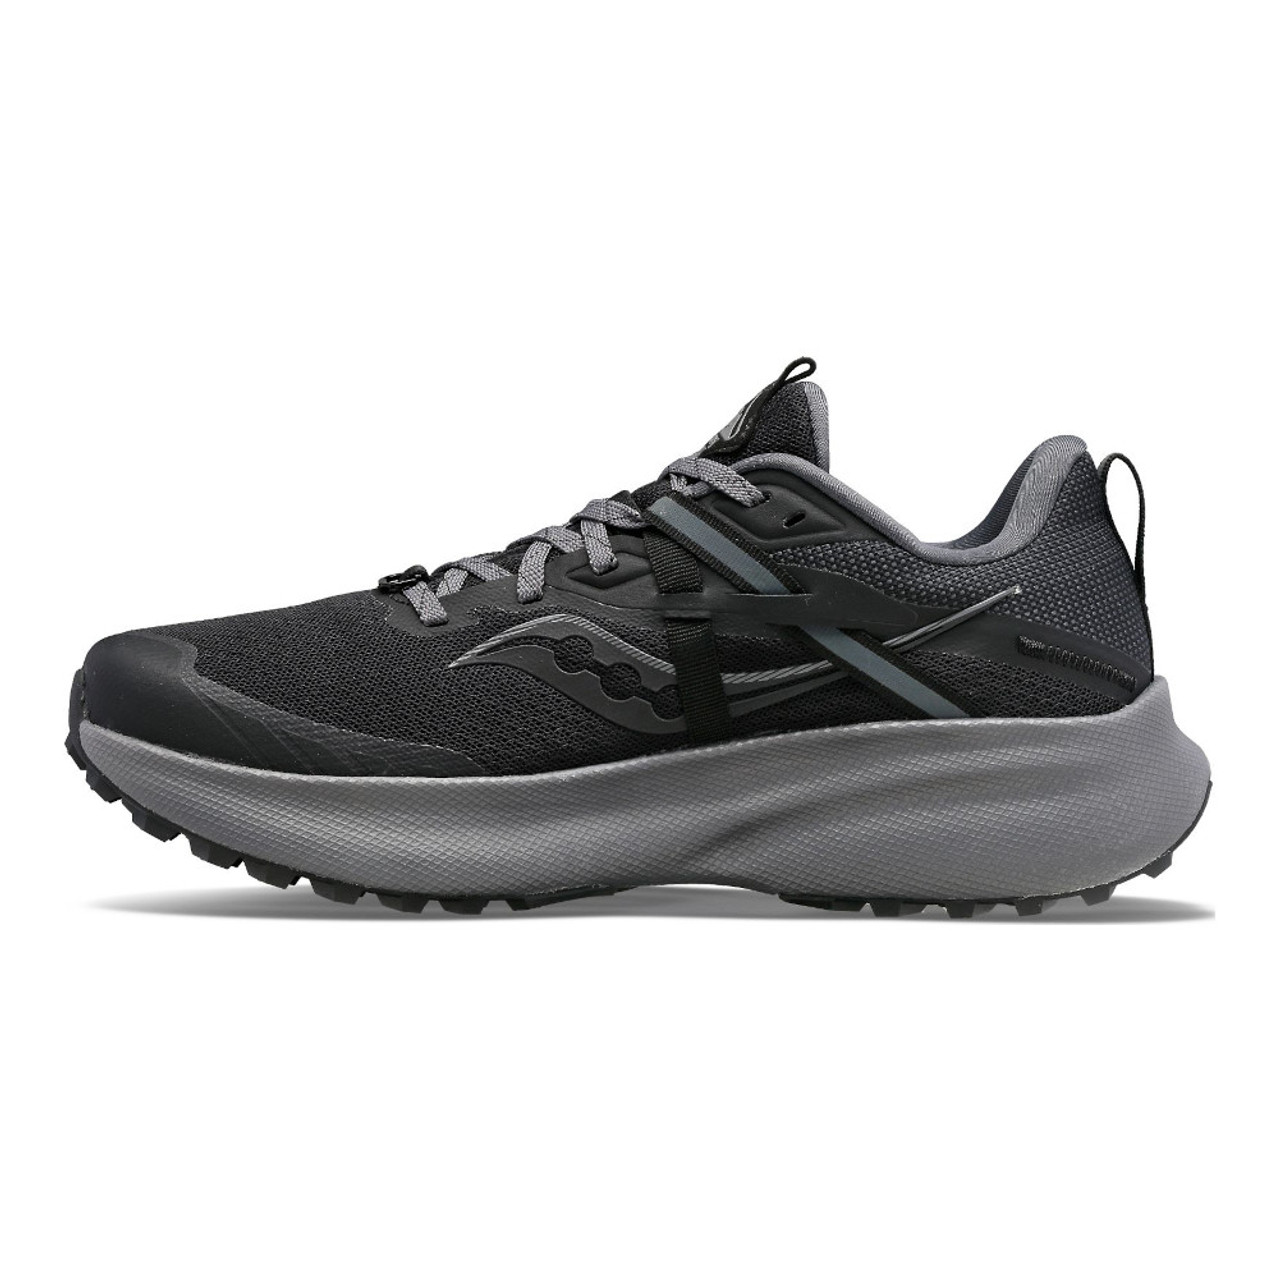 SAUCONY Men's Ride 15 TR Running Shoes - Free Shipping